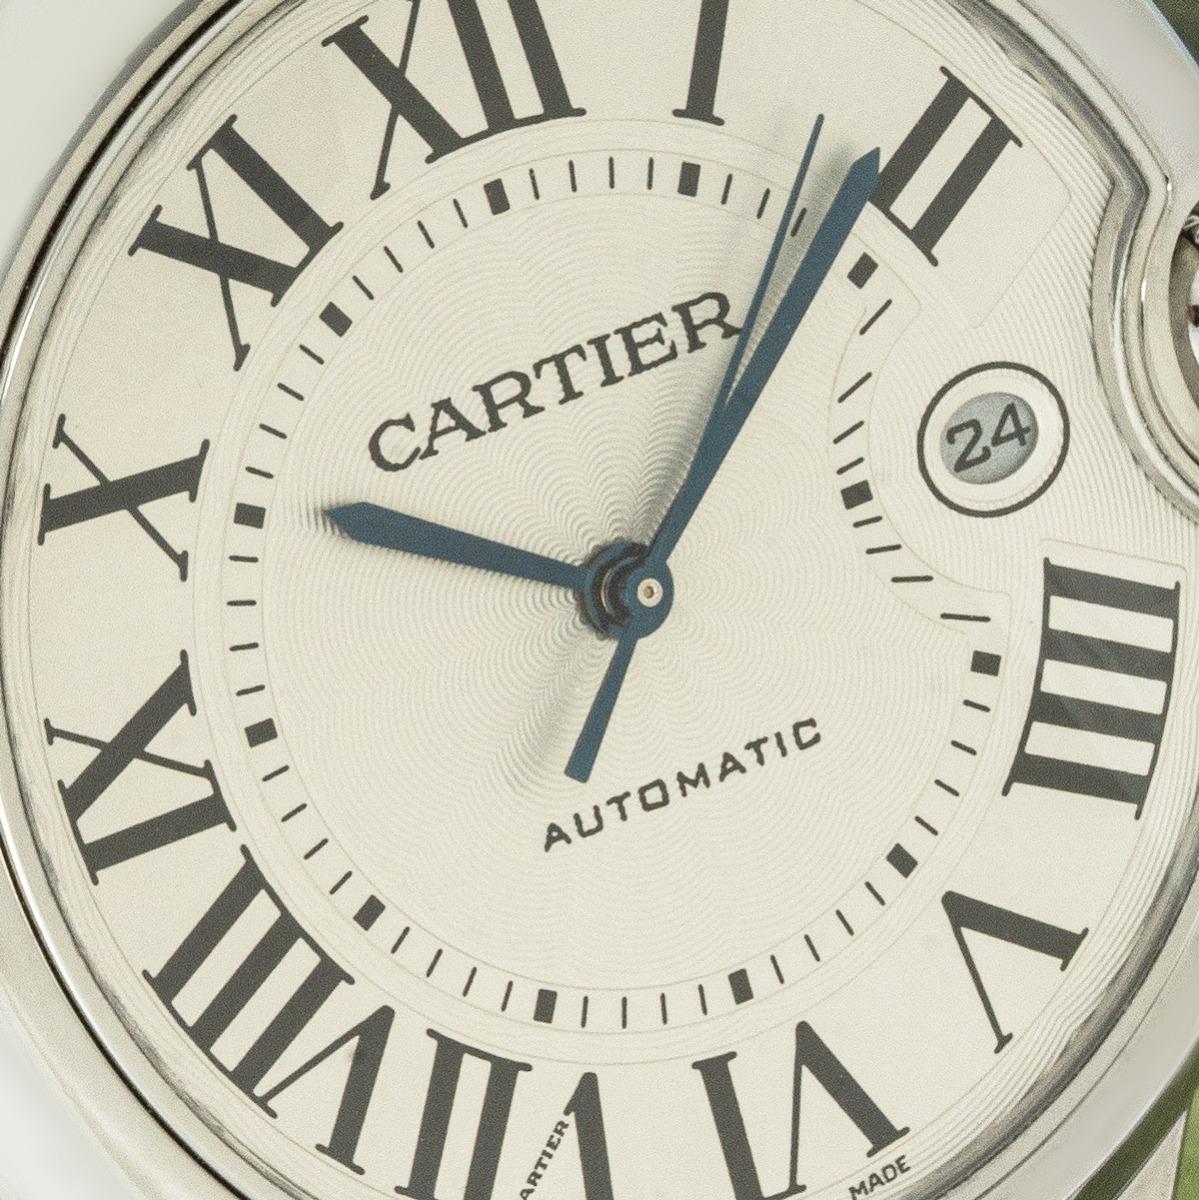 Cartier Ballon Bleu Stainless Steel W69012Z4 In Excellent Condition For Sale In London, GB